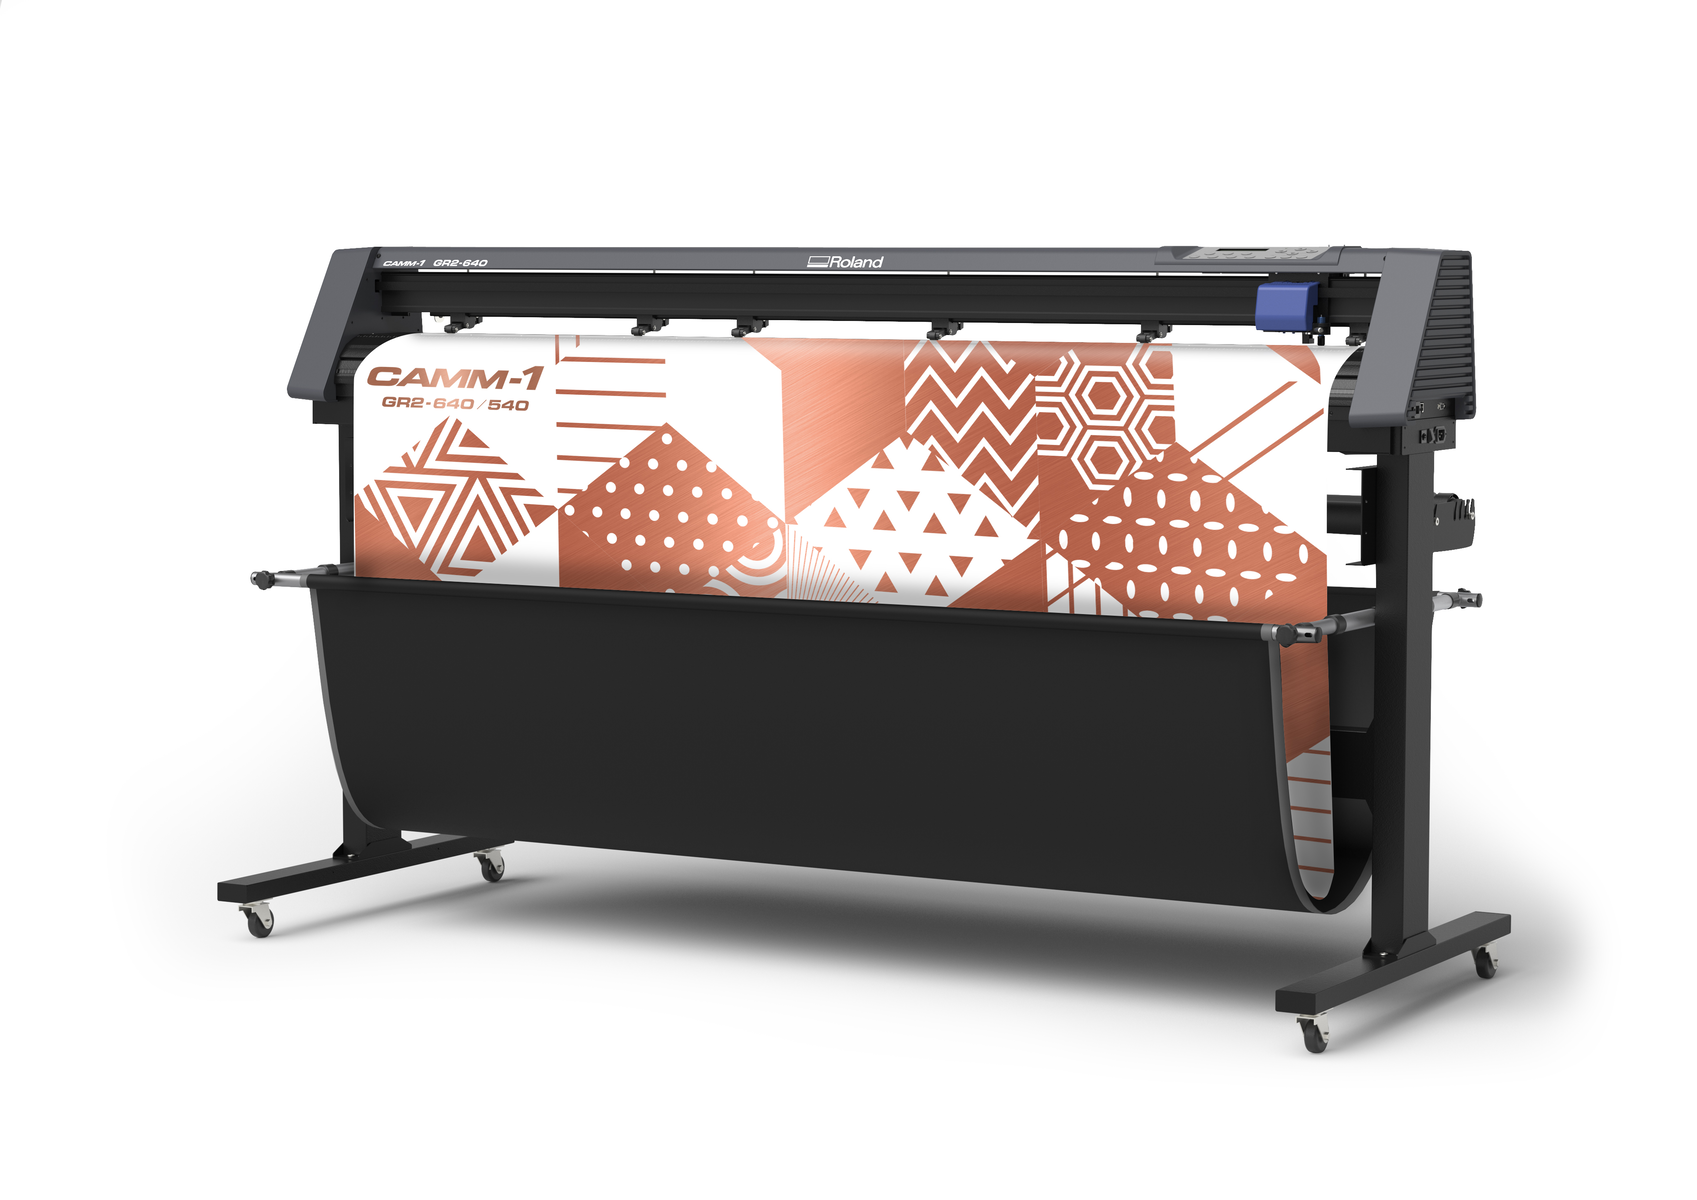 Introducing: Roland CAMM 1 GR2 Series Large Format Vinyl Cutters